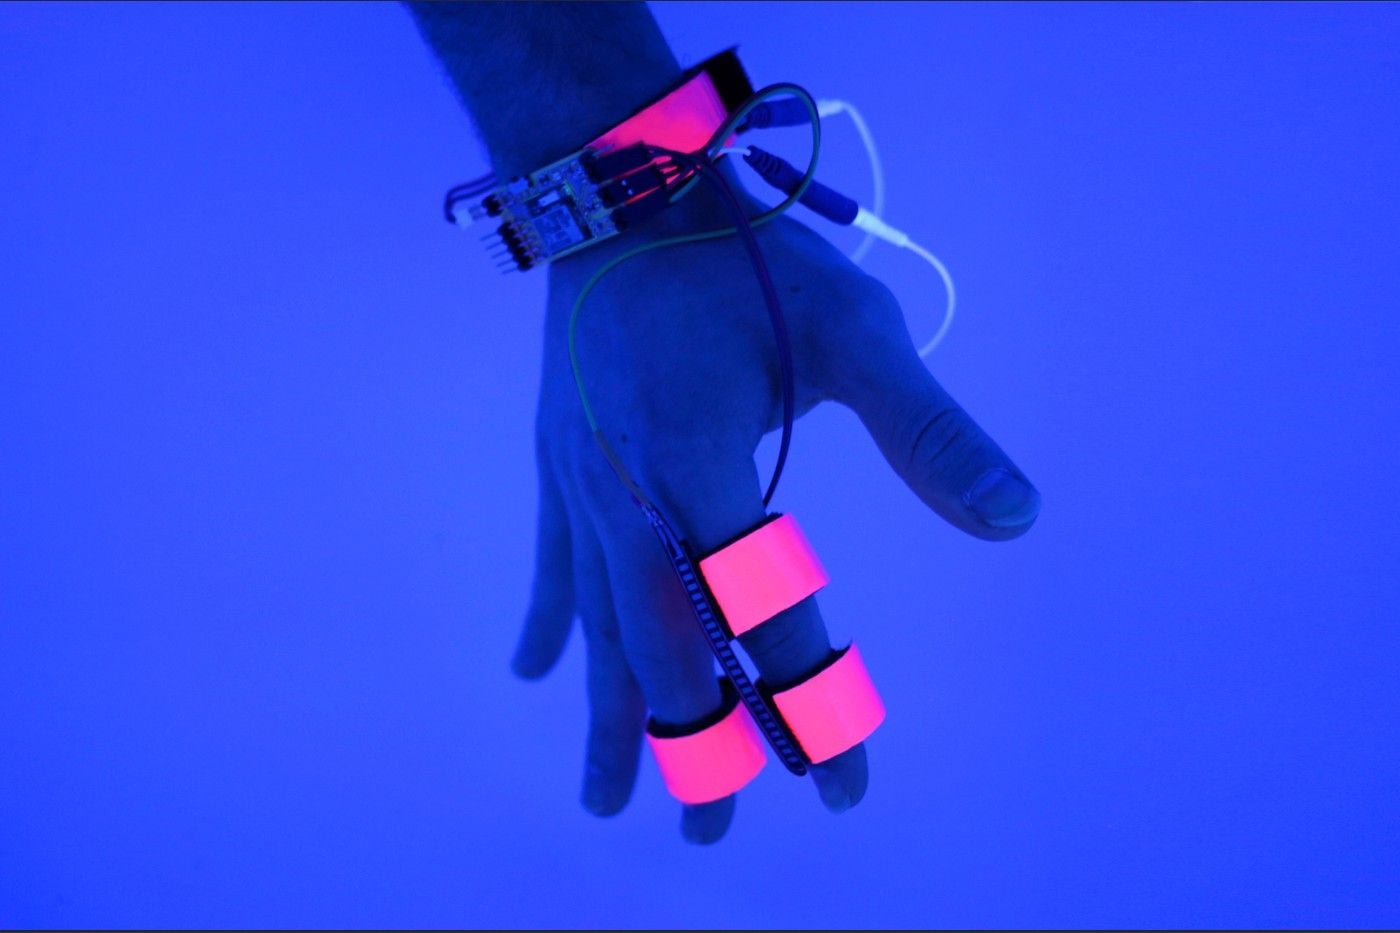 A person's hand wrapped in the sensors that make up MIT's new dream-altering Dormio technology.